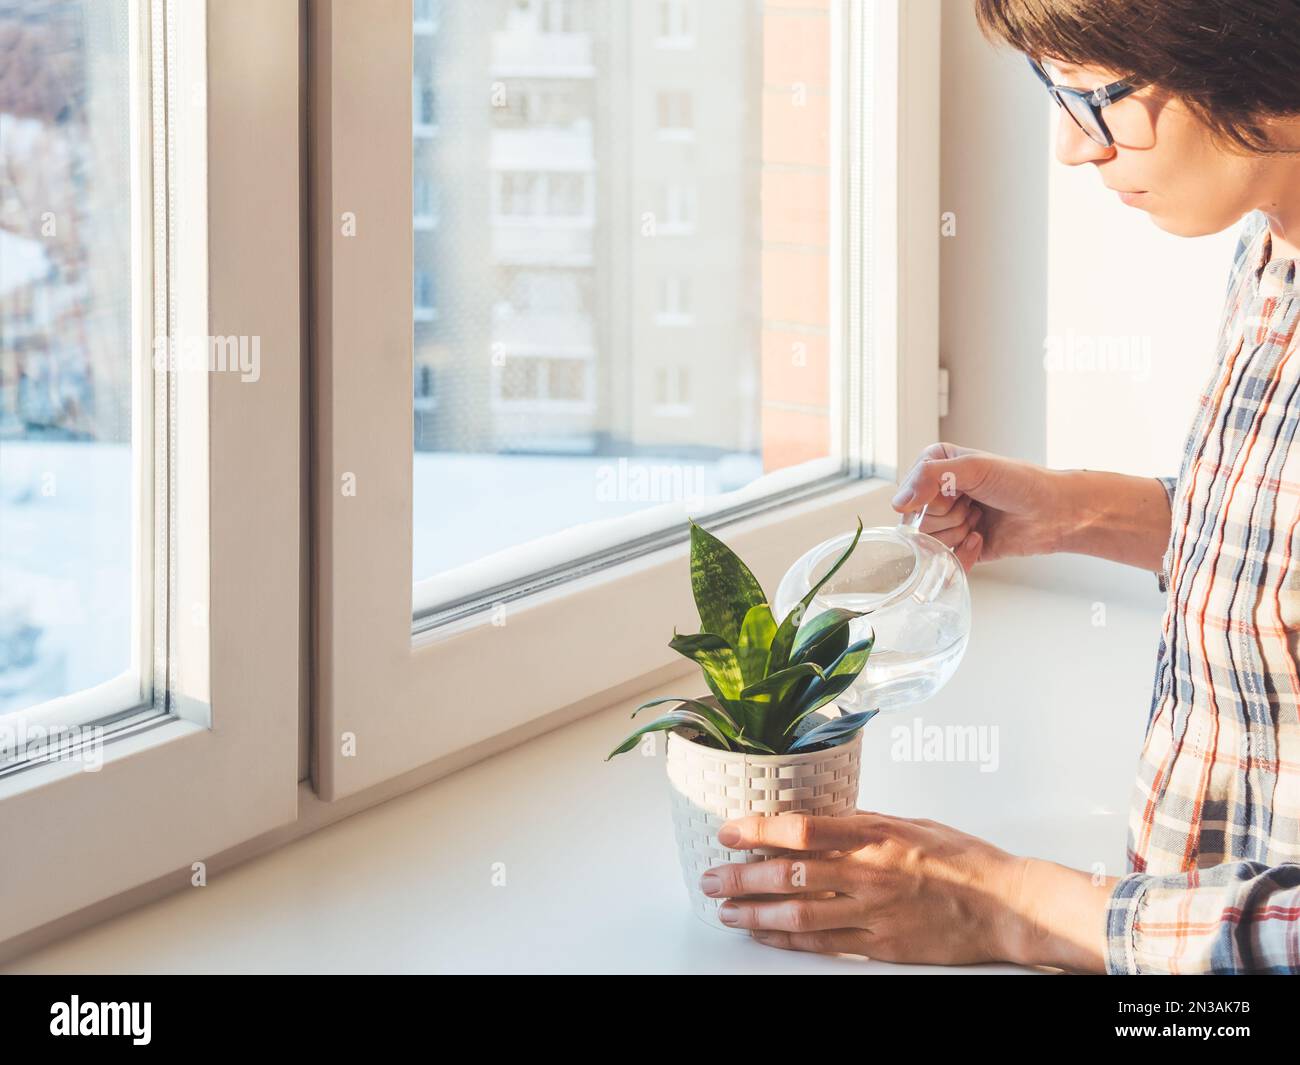 Woman watering Sansevieria. Succulent plant in flower pots on window sill. Peaceful botanical hobby. Gardening at home. Winter sunset. Stock Photo